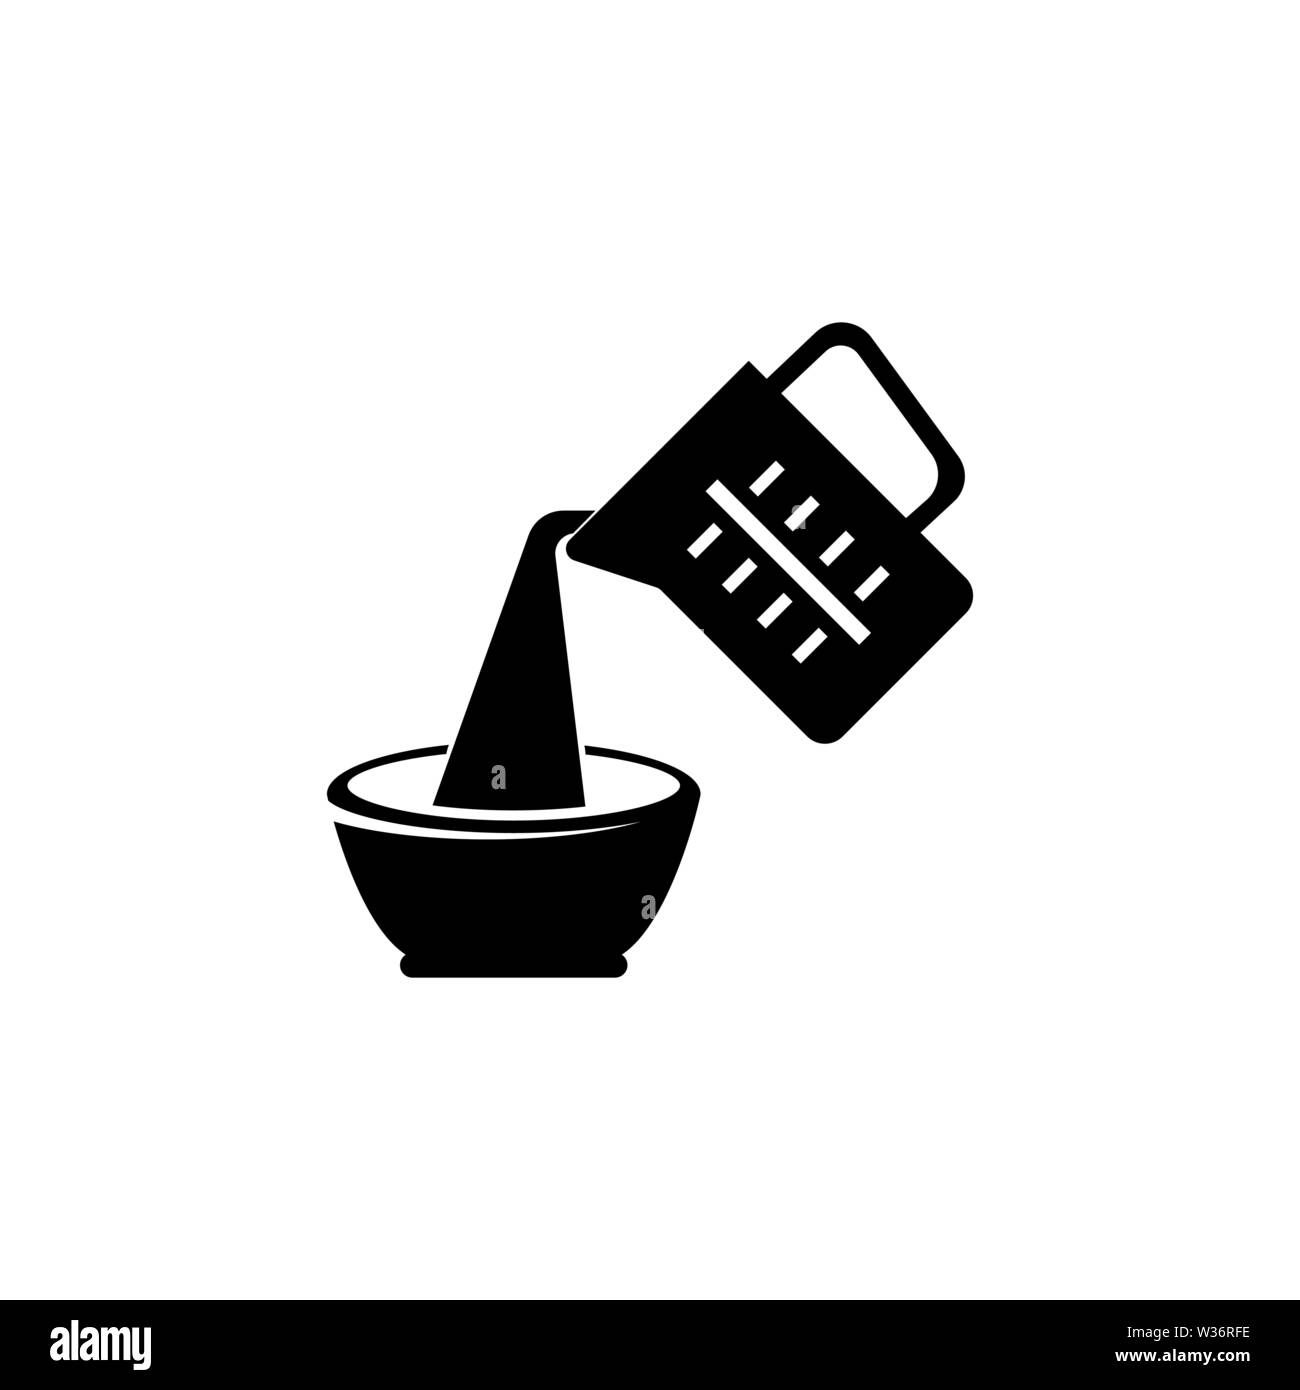 Kettle Pour Hot Water on Dish. Flat Vector Icon illustration. Simple black symbol on white background. Kettle Pour Hot Water on Dish sign design templ Stock Vector